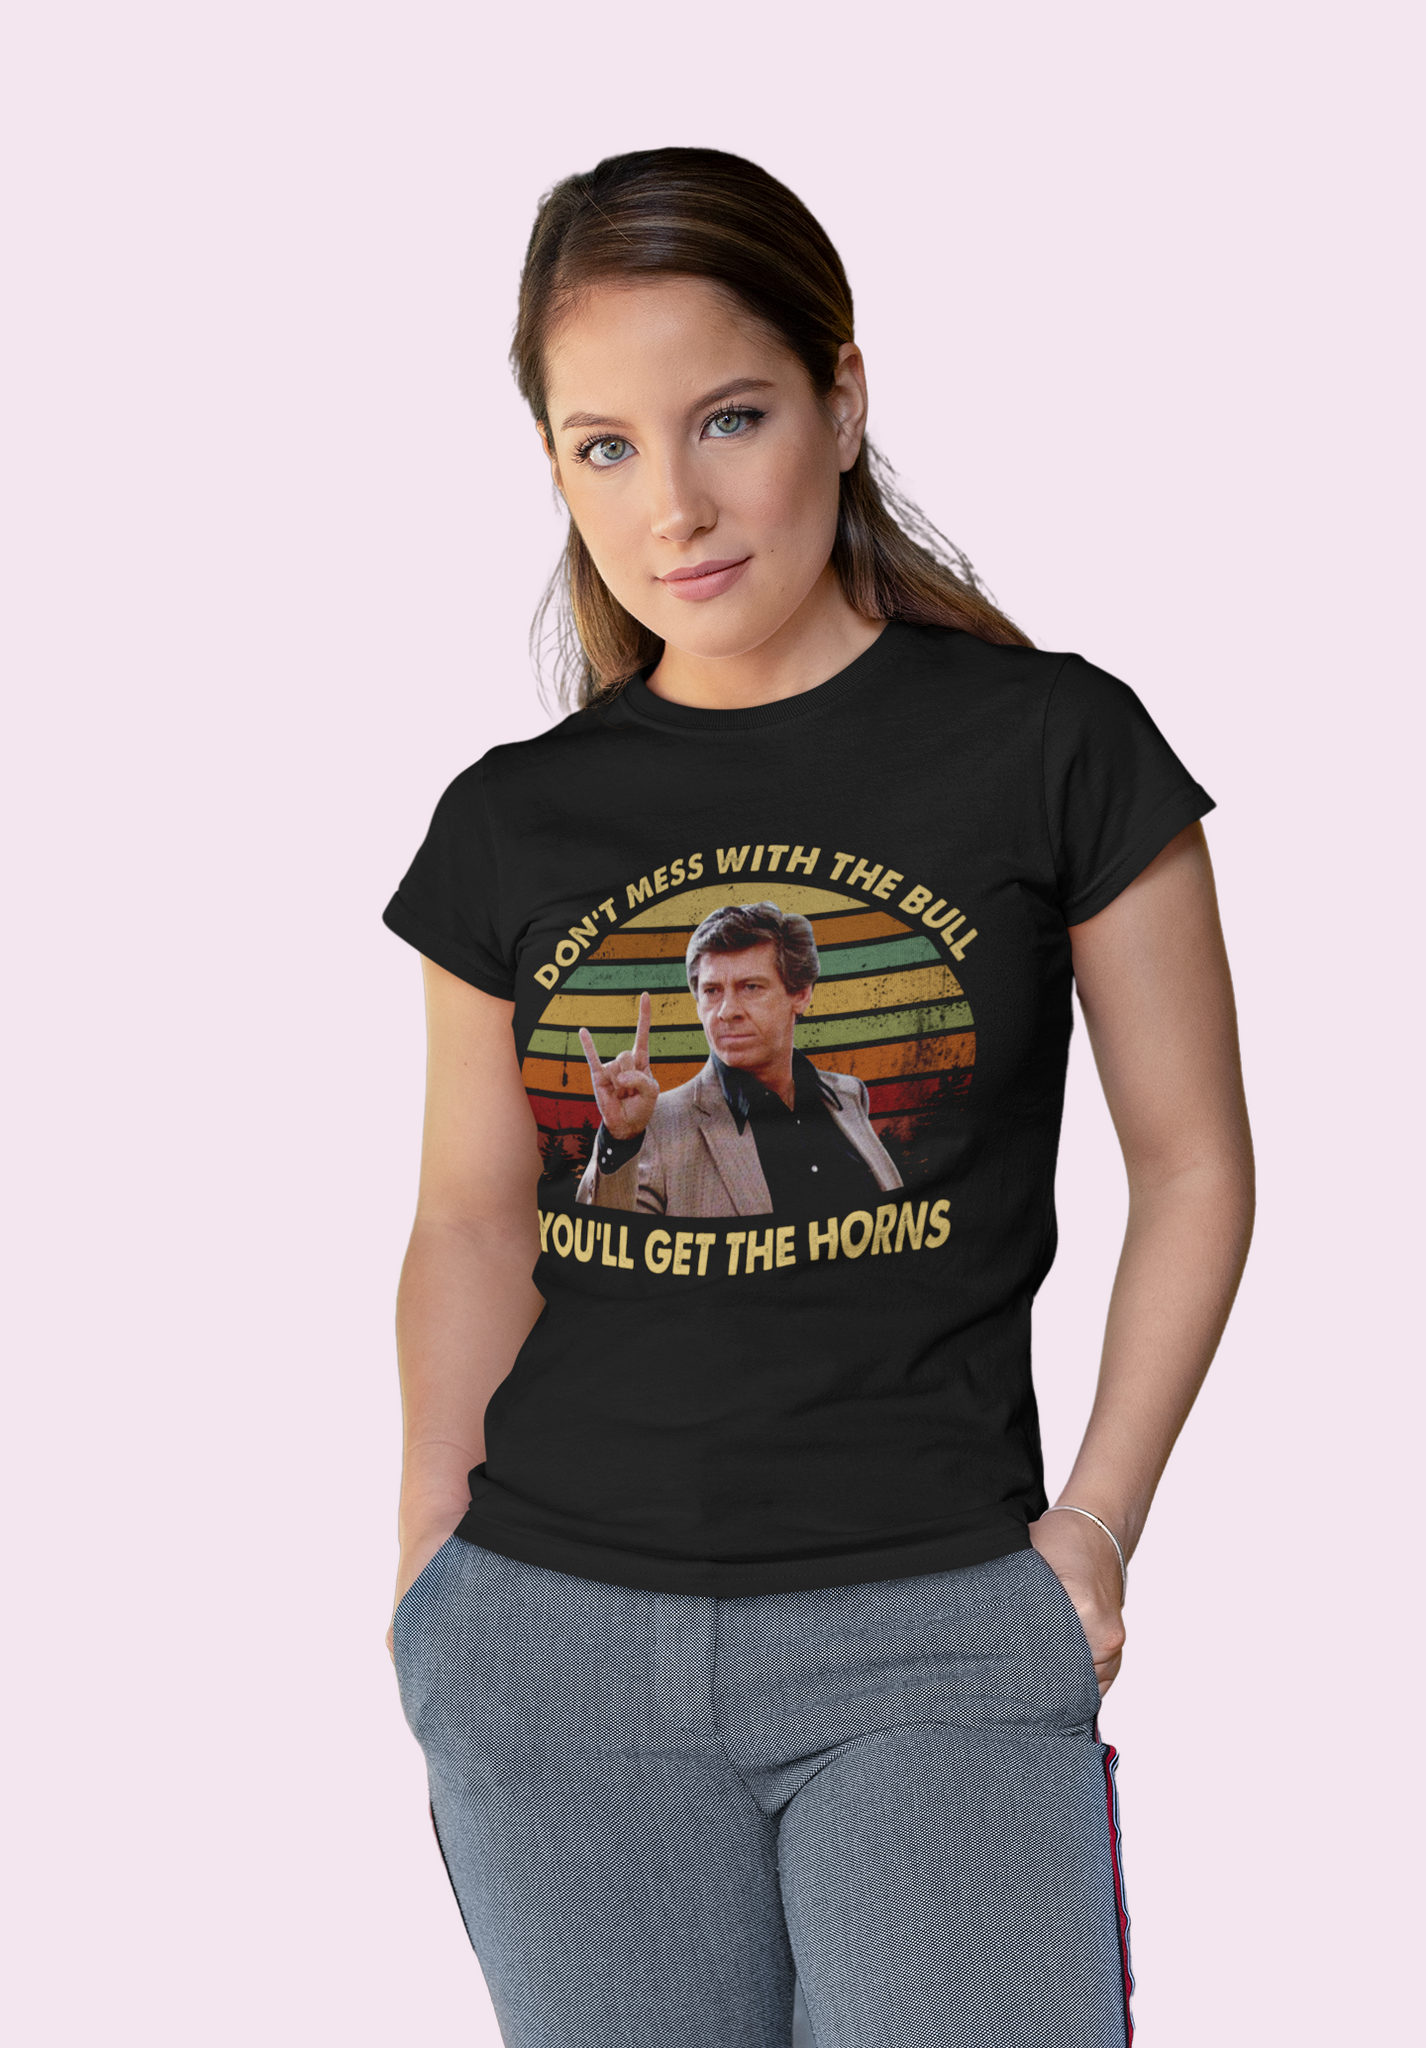 Breakfast Club Vintage T Shirt, Richard Vernon T Shirt, Dont Mess With The Bull Youll Get The Horns Tshirt